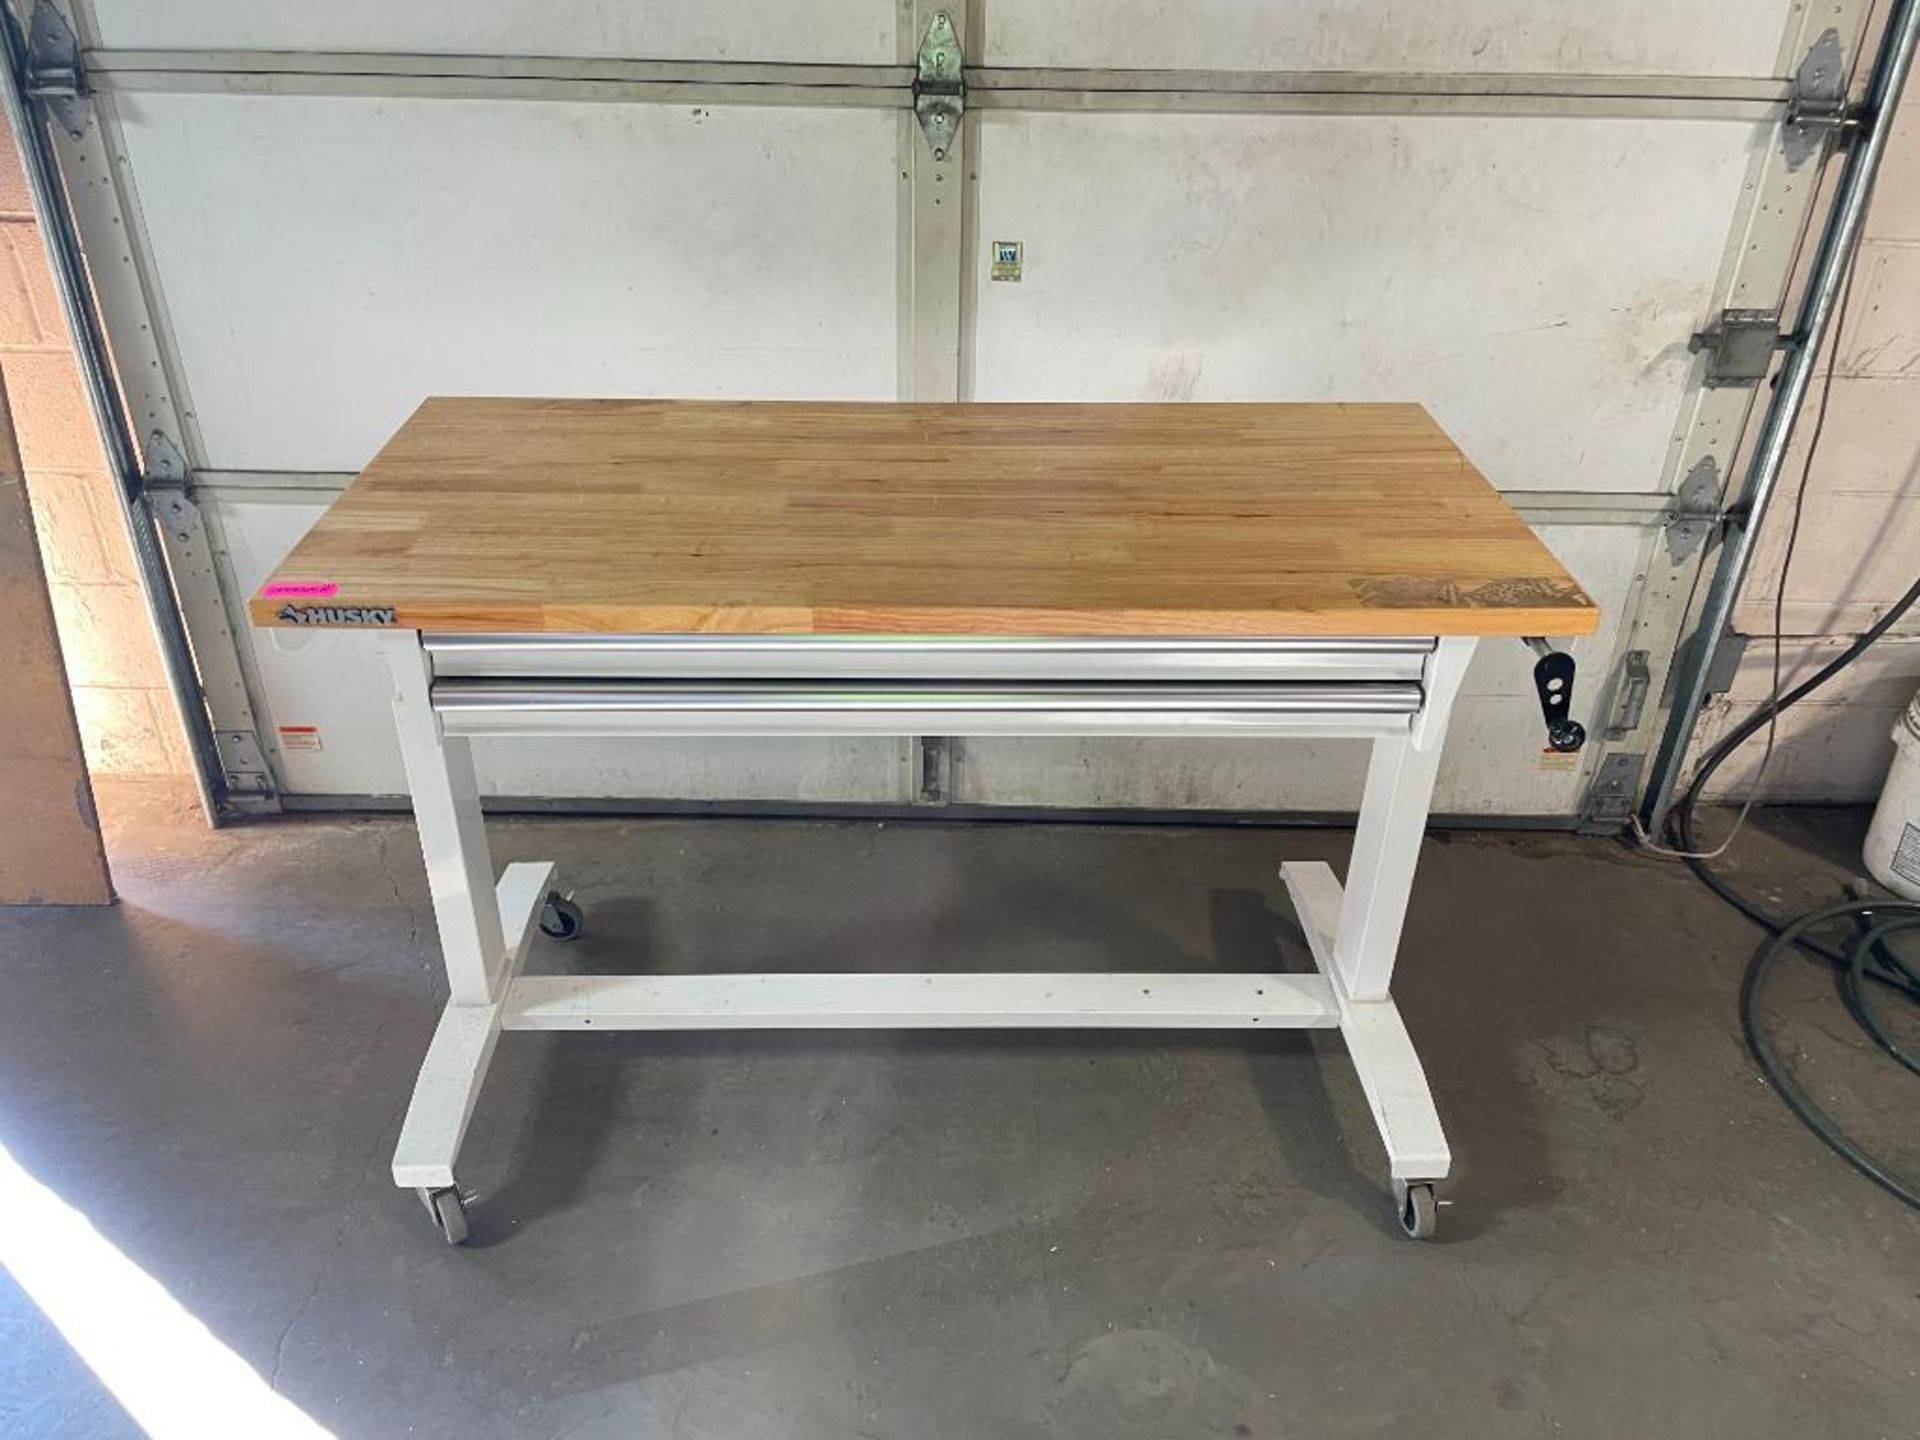 52" ADJUSTABLE HEIGHT WORKBENCH TABLE W/ 2-DRAWERS IN WHITE BRAND/MODEL: HUSKY SIZE: 52" X 24" QTY: - Image 2 of 7